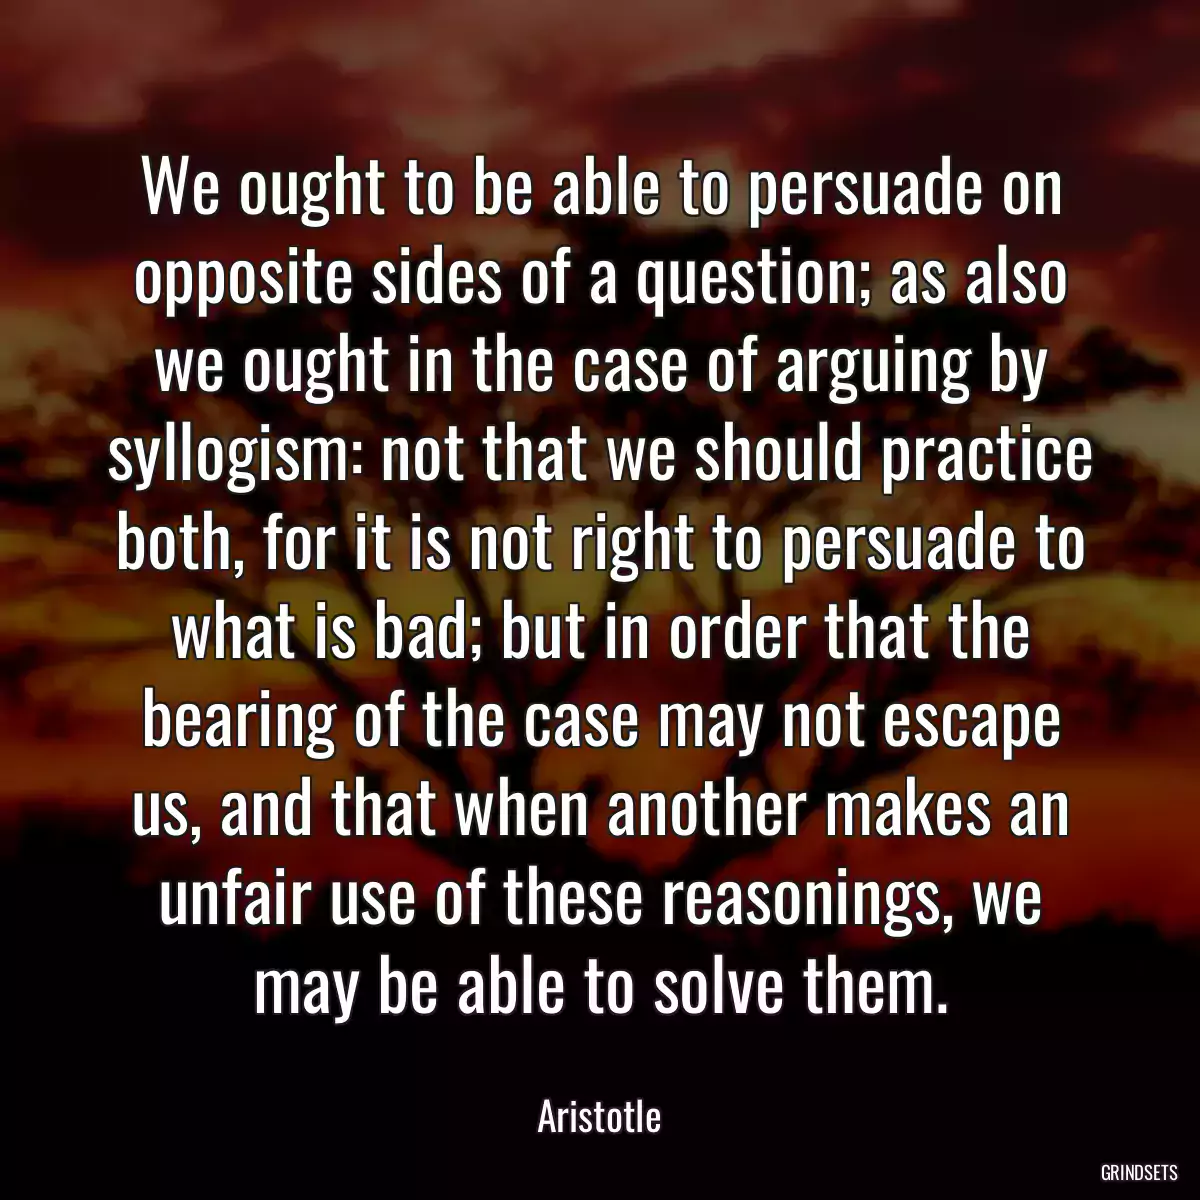 We ought to be able to persuade on opposite sides of a question; as also we ought in the case of arguing by syllogism: not that we should practice both, for it is not right to persuade to what is bad; but in order that the bearing of the case may not escape us, and that when another makes an unfair use of these reasonings, we may be able to solve them.